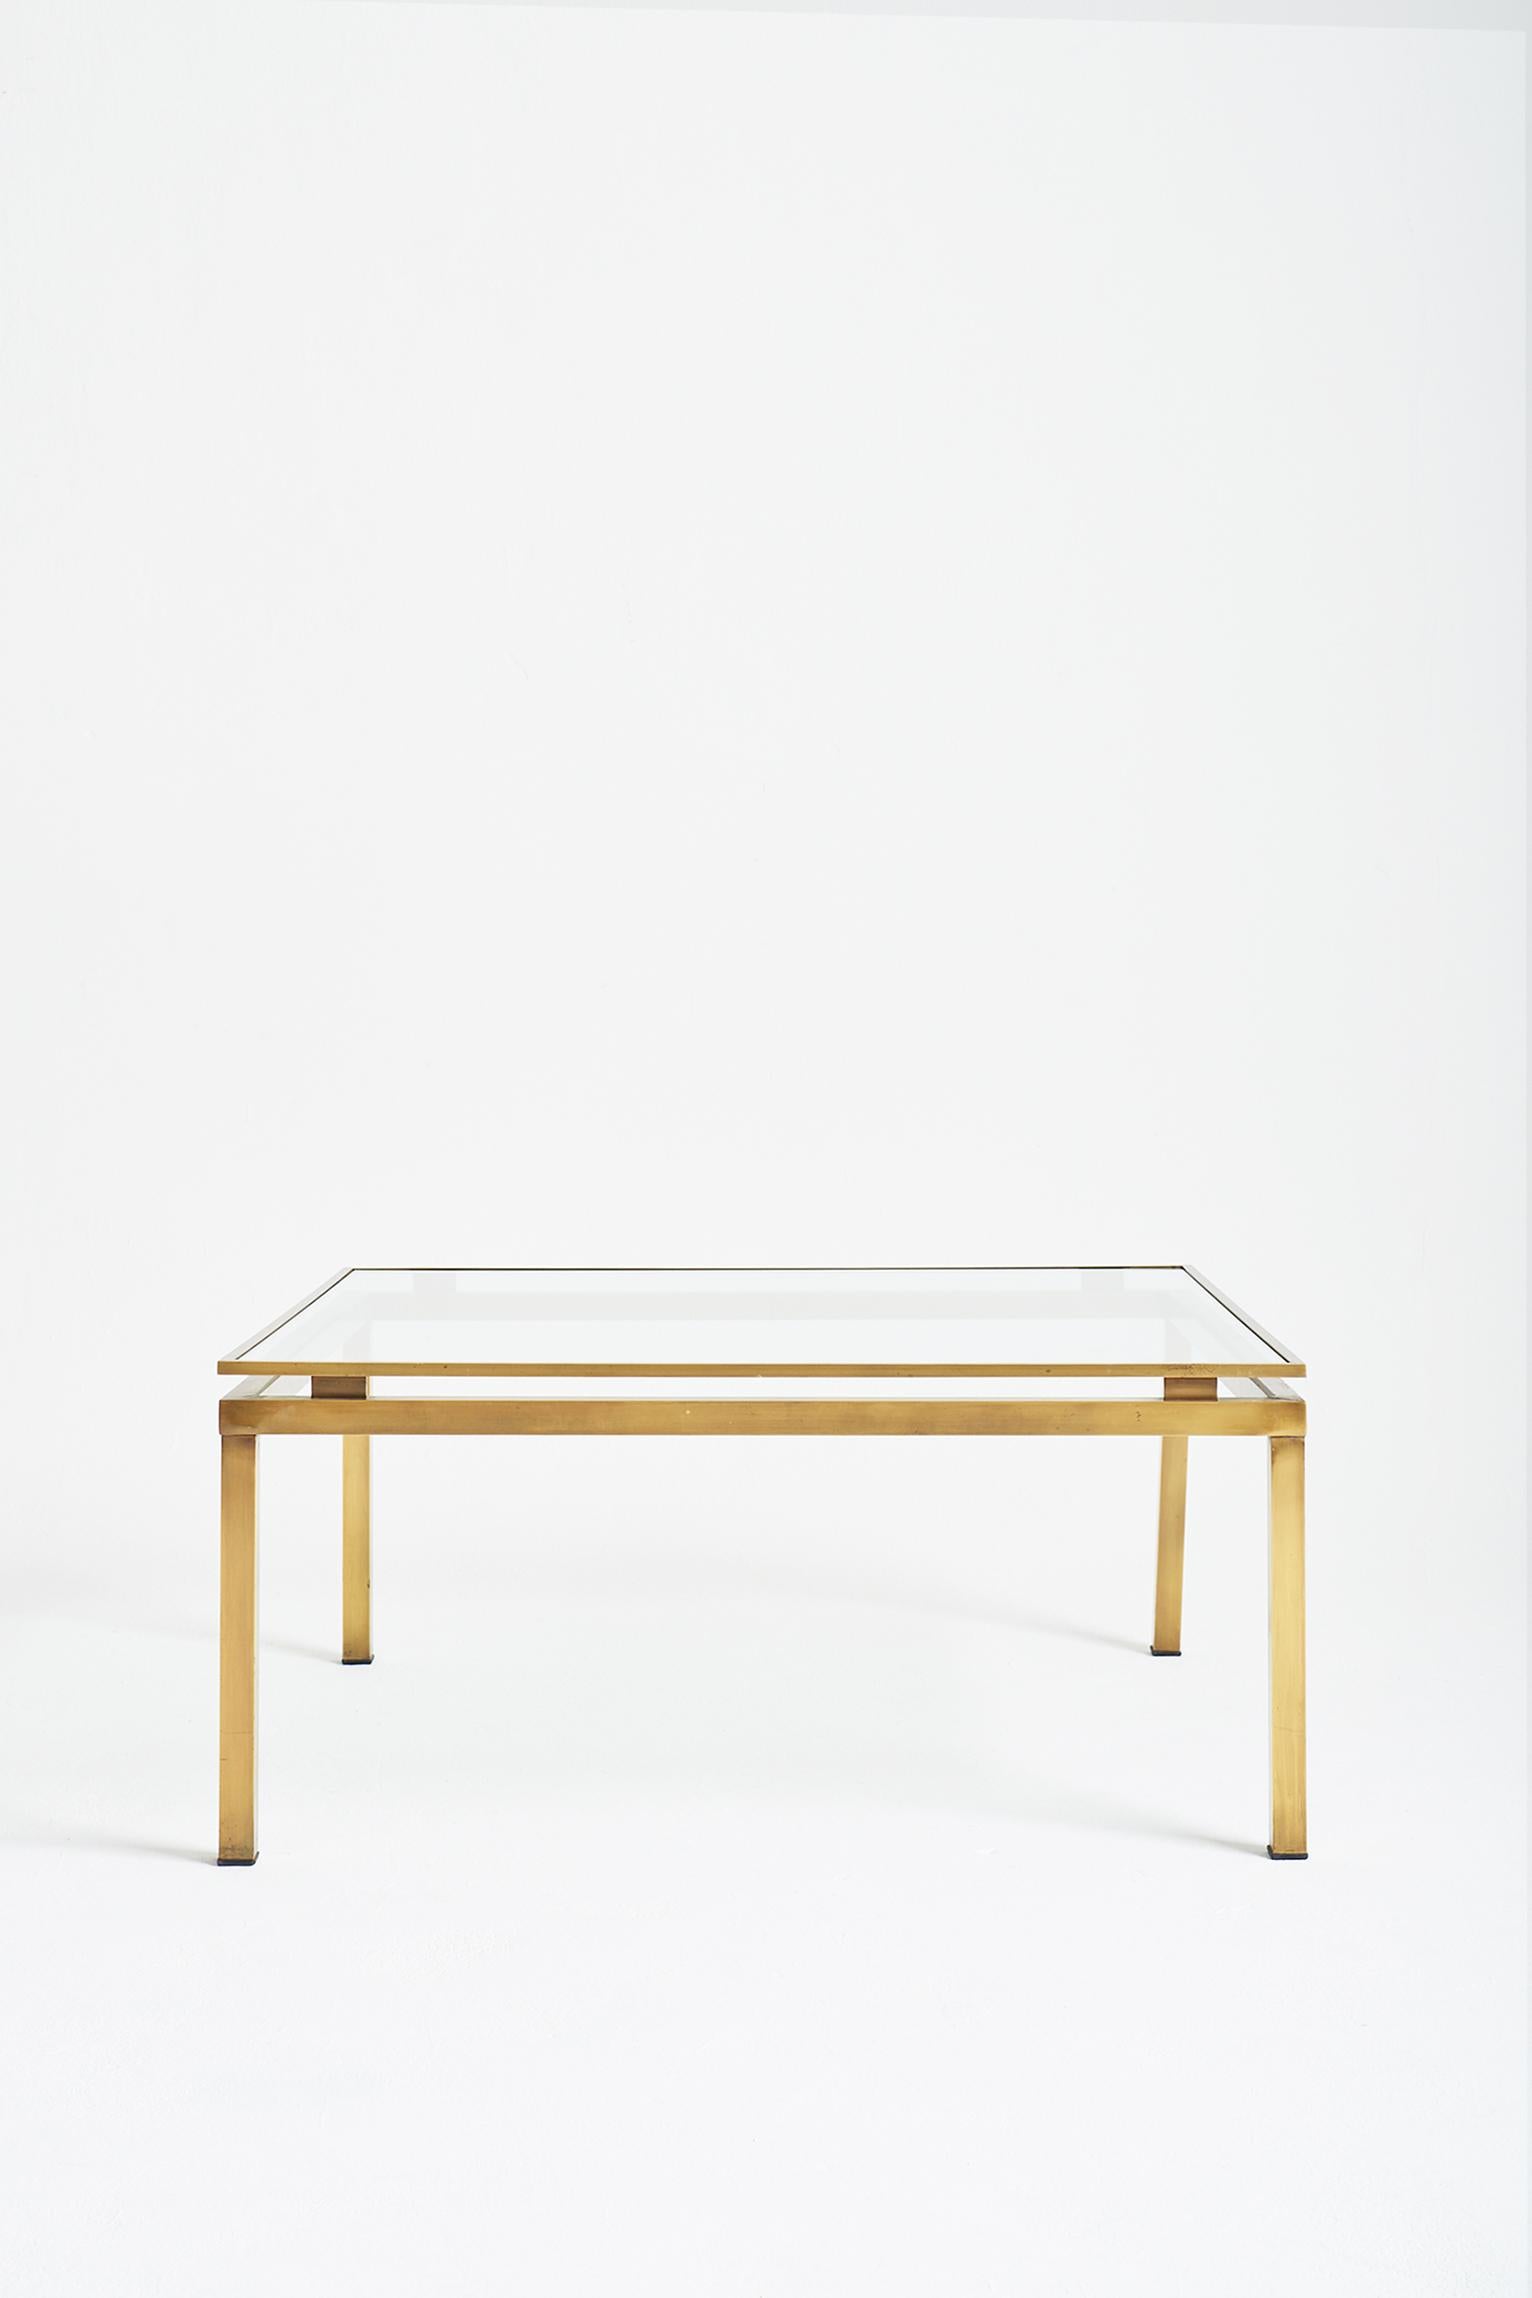 A brass and glass two-tiered square coffee table,
France, Circa 1970.